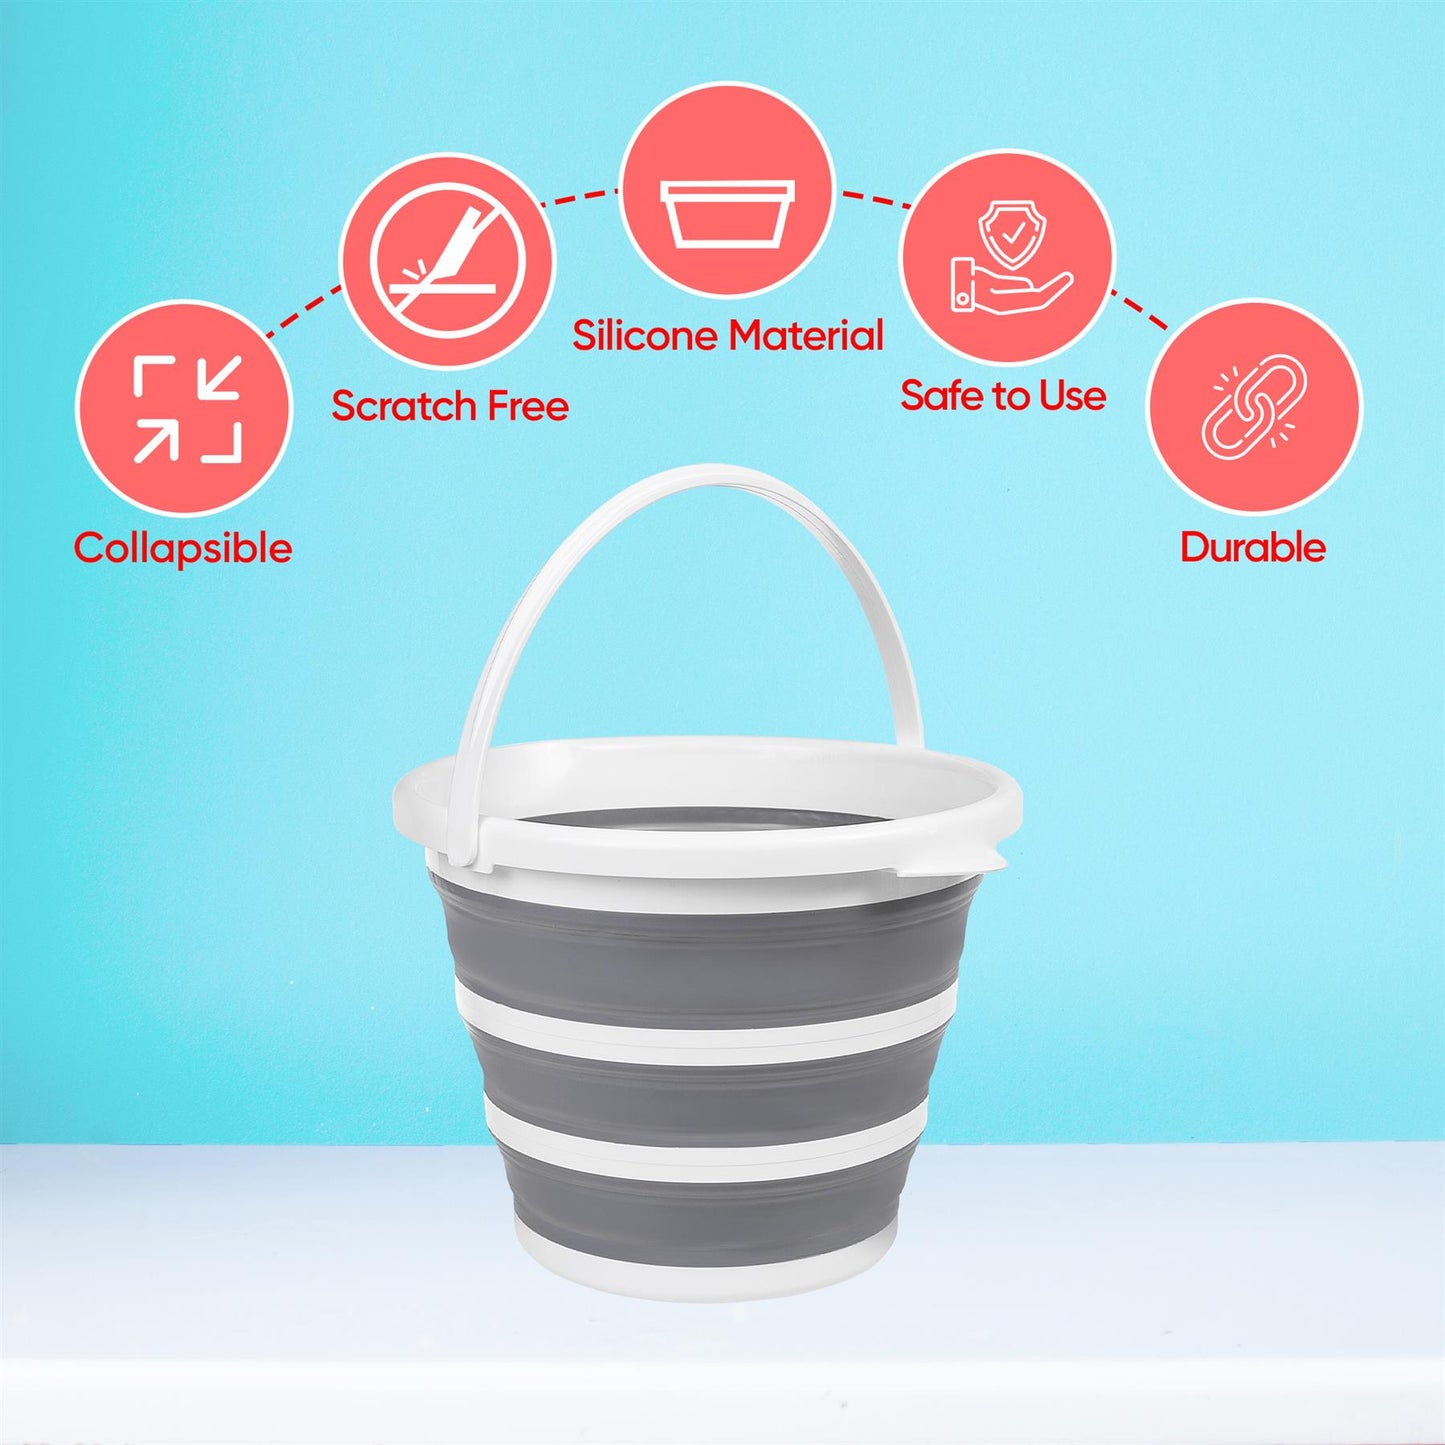 10-Liter Collapsible Silicone Kitchen Bucket For Dishwashing And Cleaning